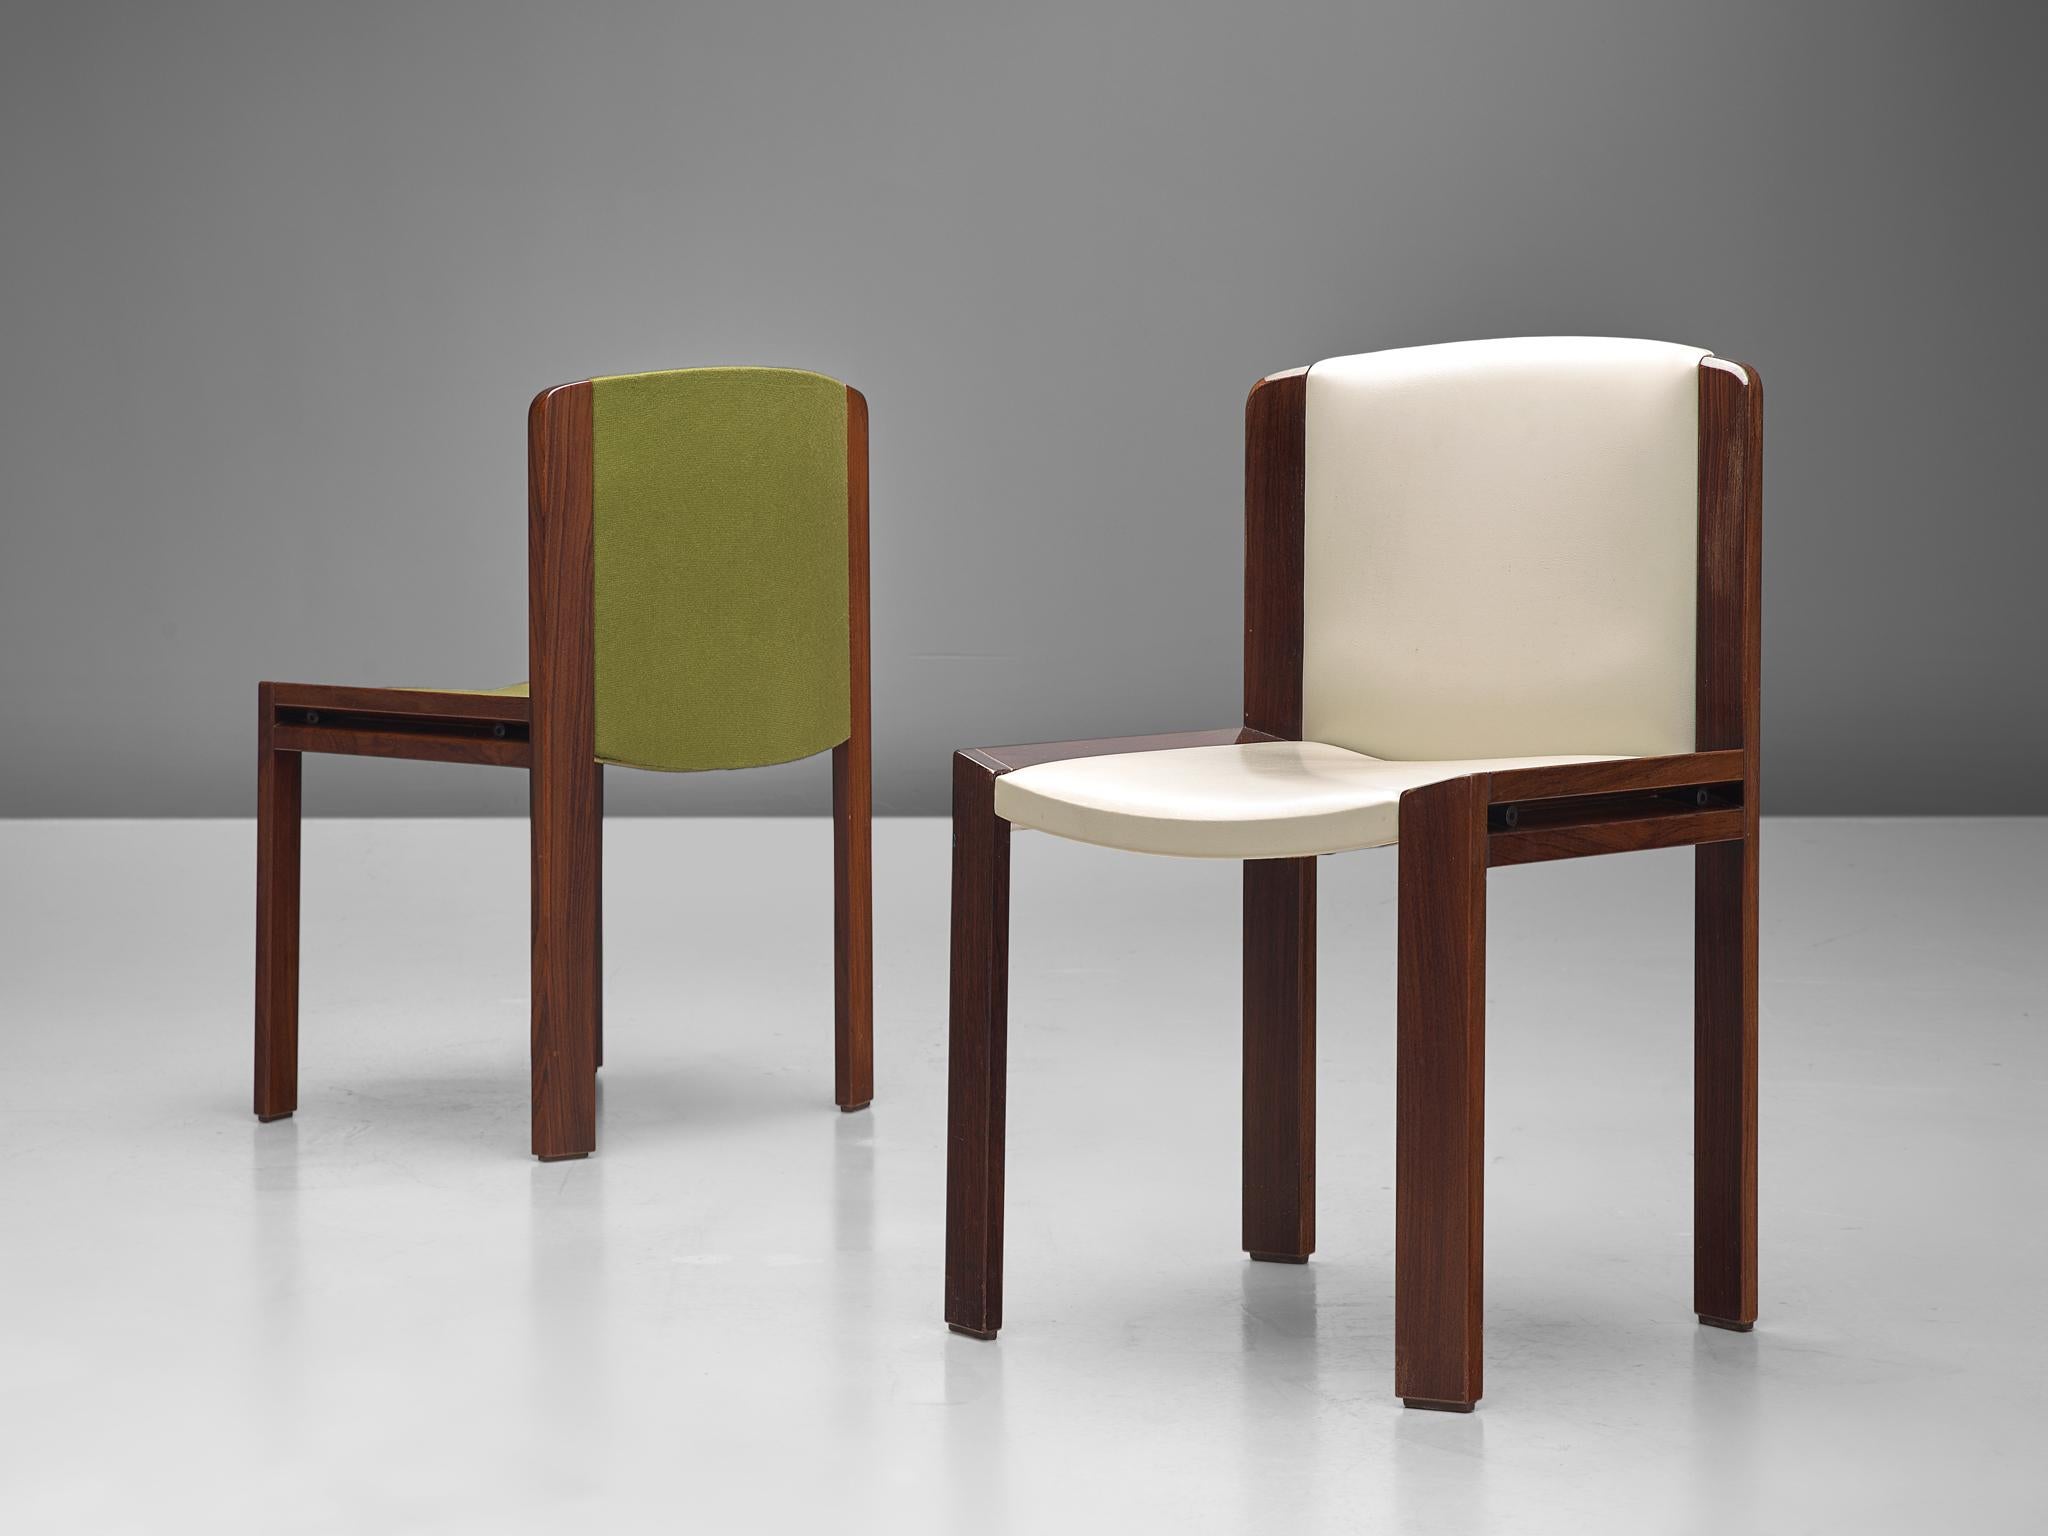 Fabric Twelve '300' Dining Chairs in White and Moss Green Upholstery by Joe Colombo